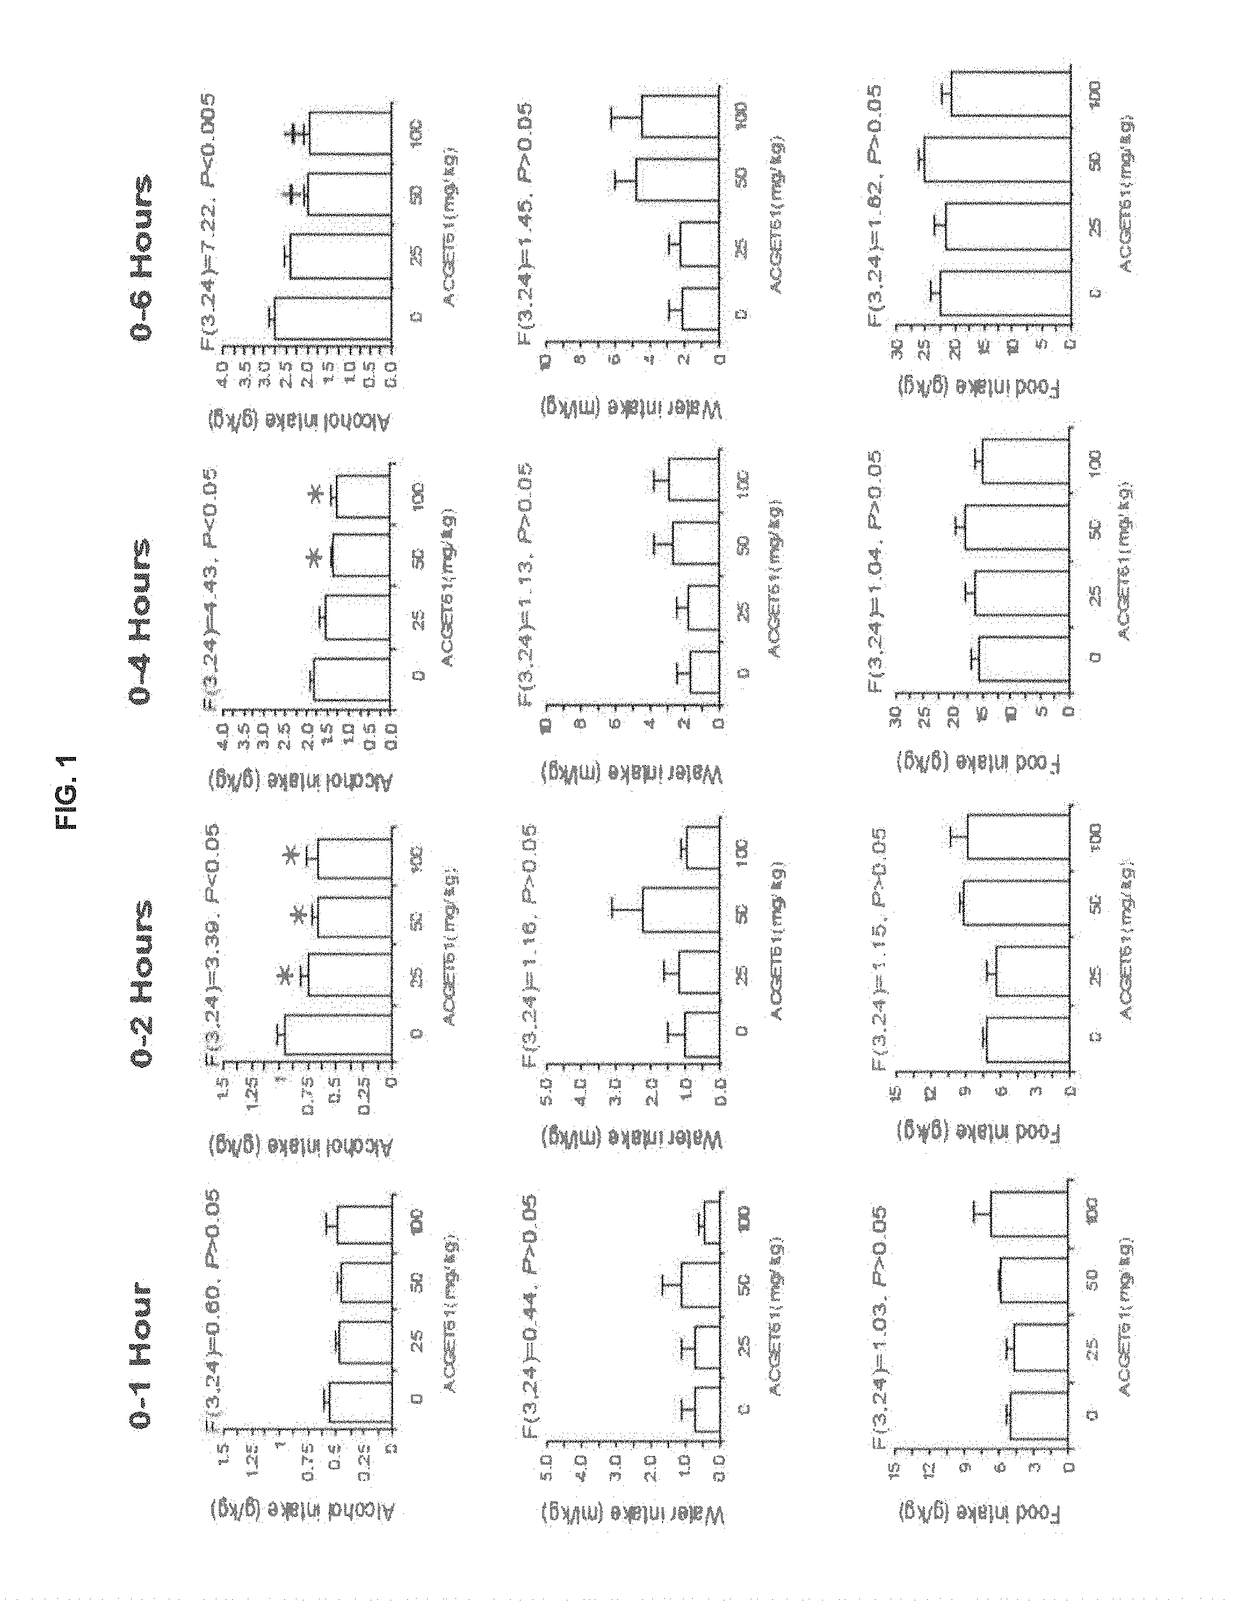 Selected amide of y-hydroxybutyric acid and uses thereof in the treatment of alcohol misuse